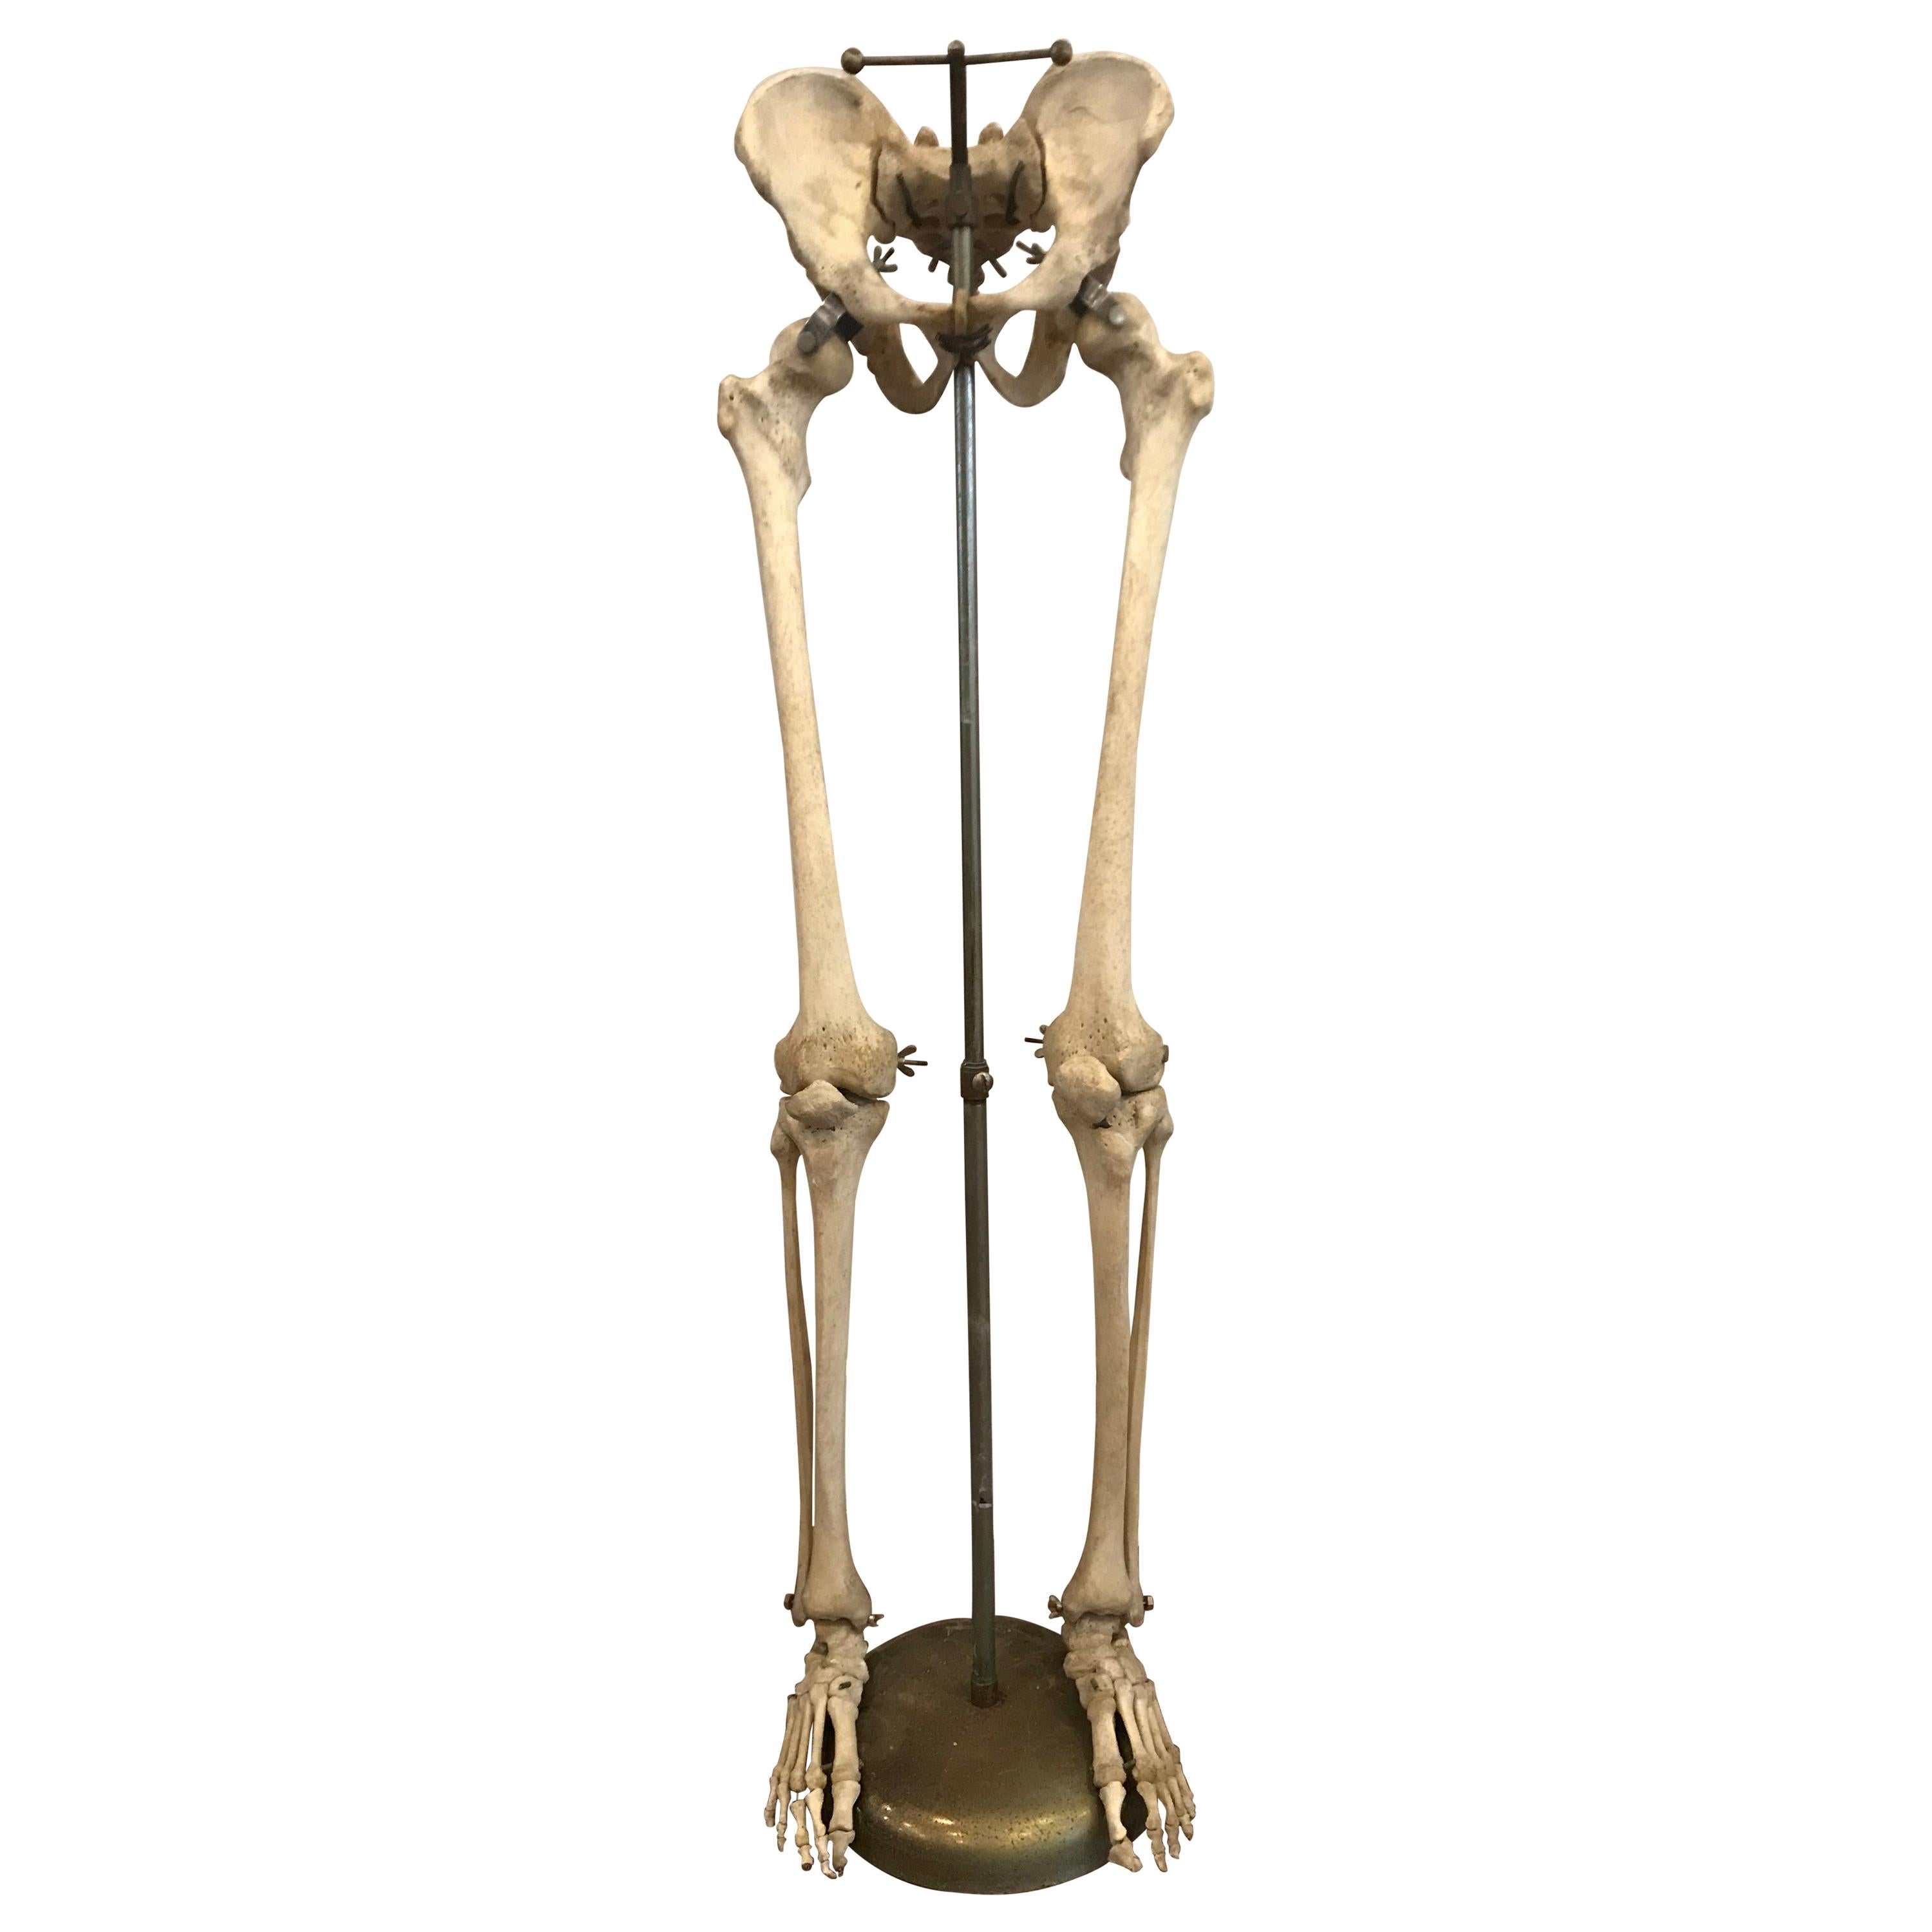 Real Human Skeleton of Articulating Lower Extremities Leg & Foot Bones on Stand